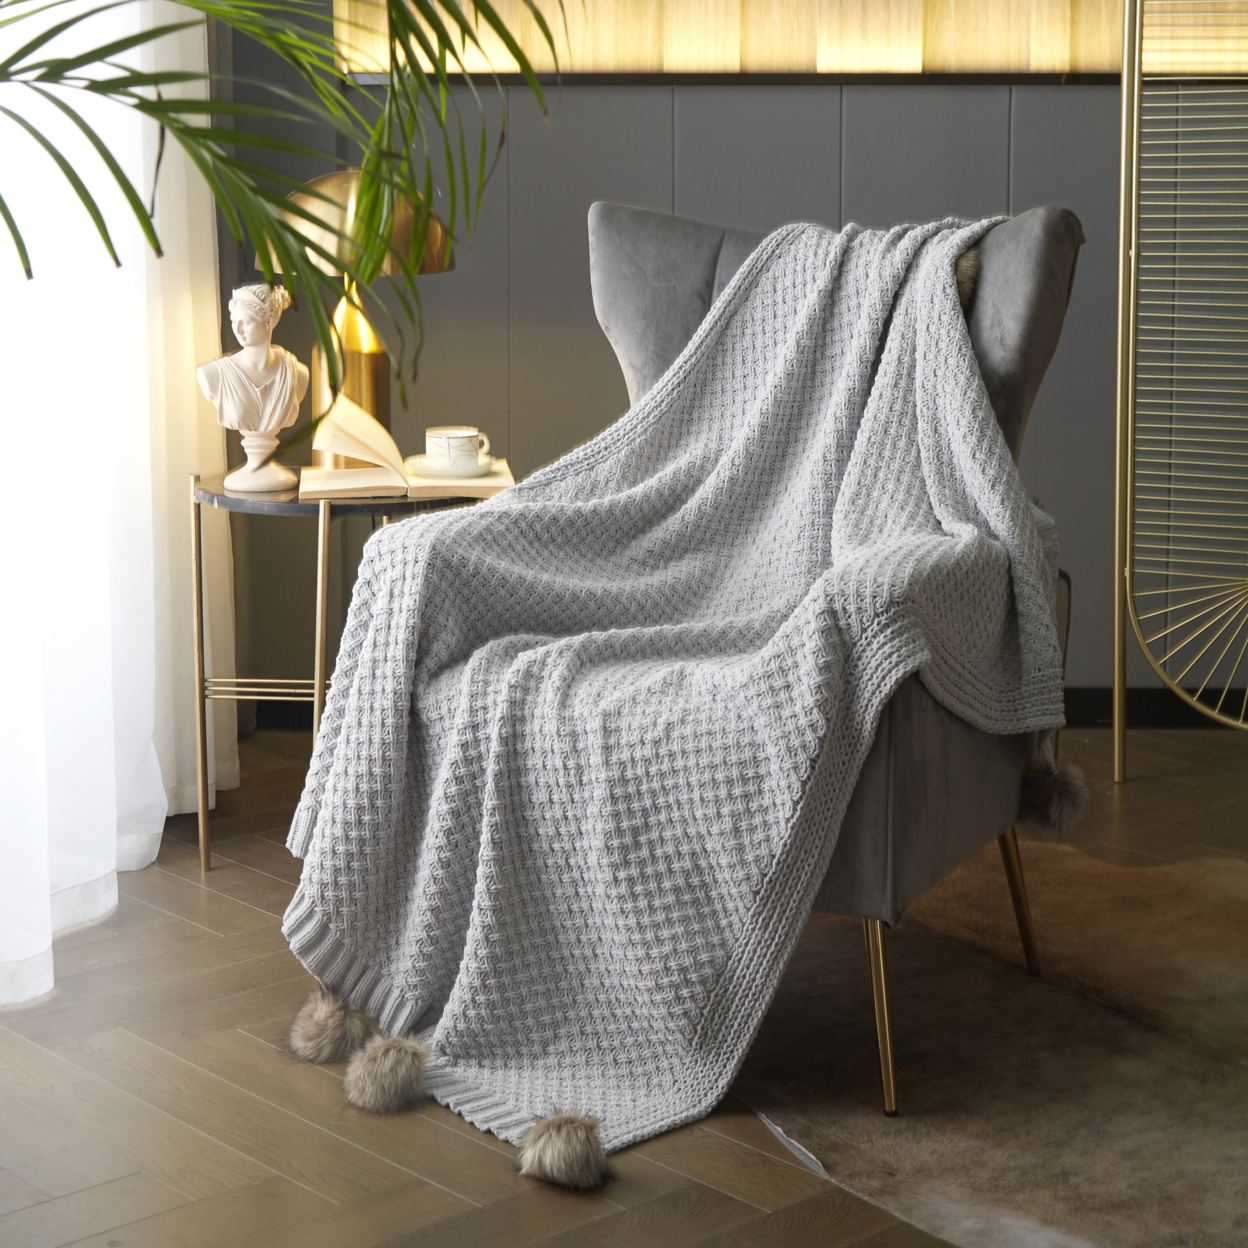 NY&C Home Corsey Knitted Throw Blanket Plush Super Soft Solid Color Design - Grey